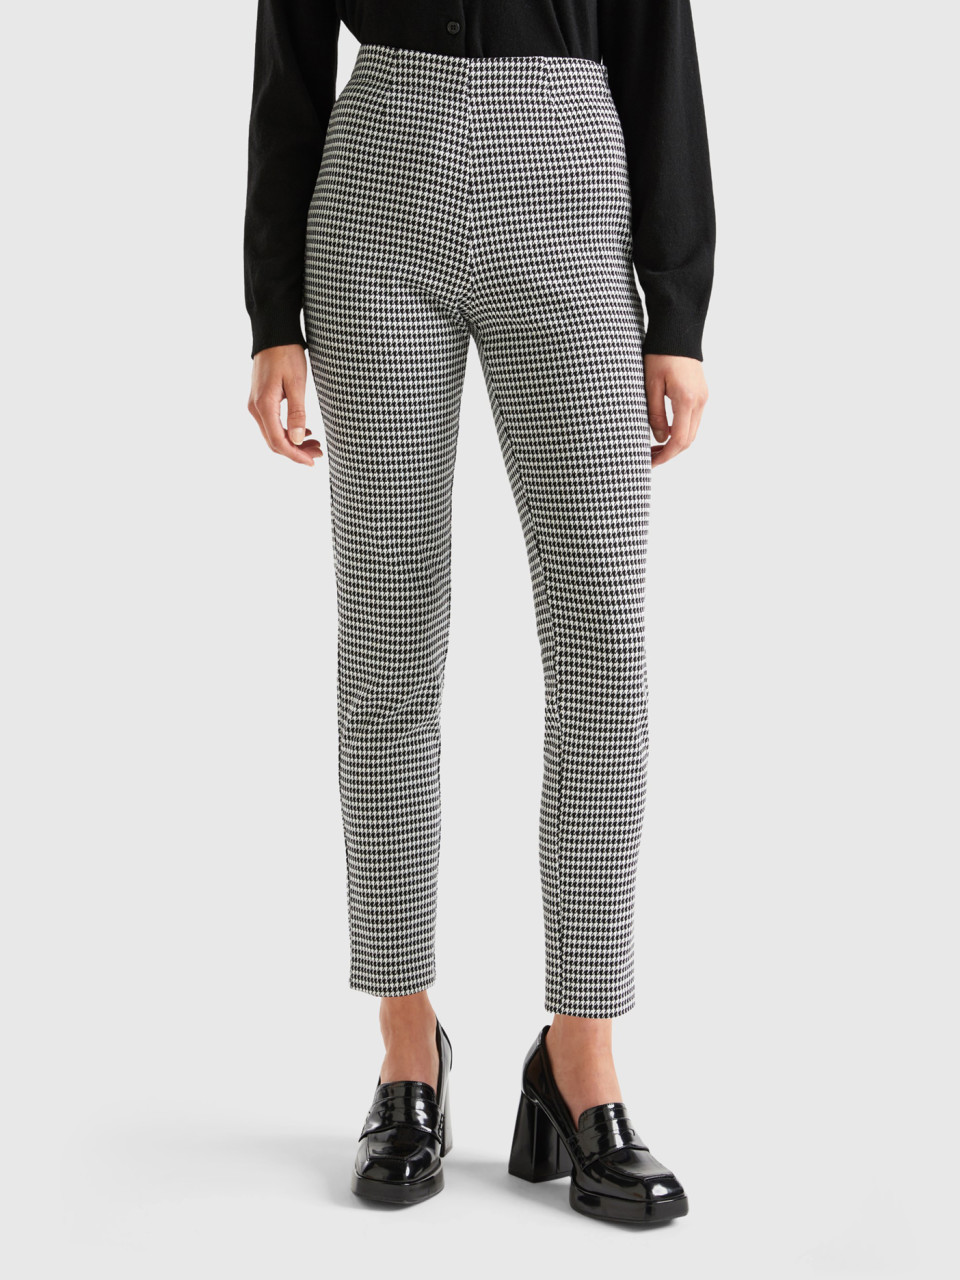 Benetton, Slim Houndstooth Trousers, Multi-color, Women